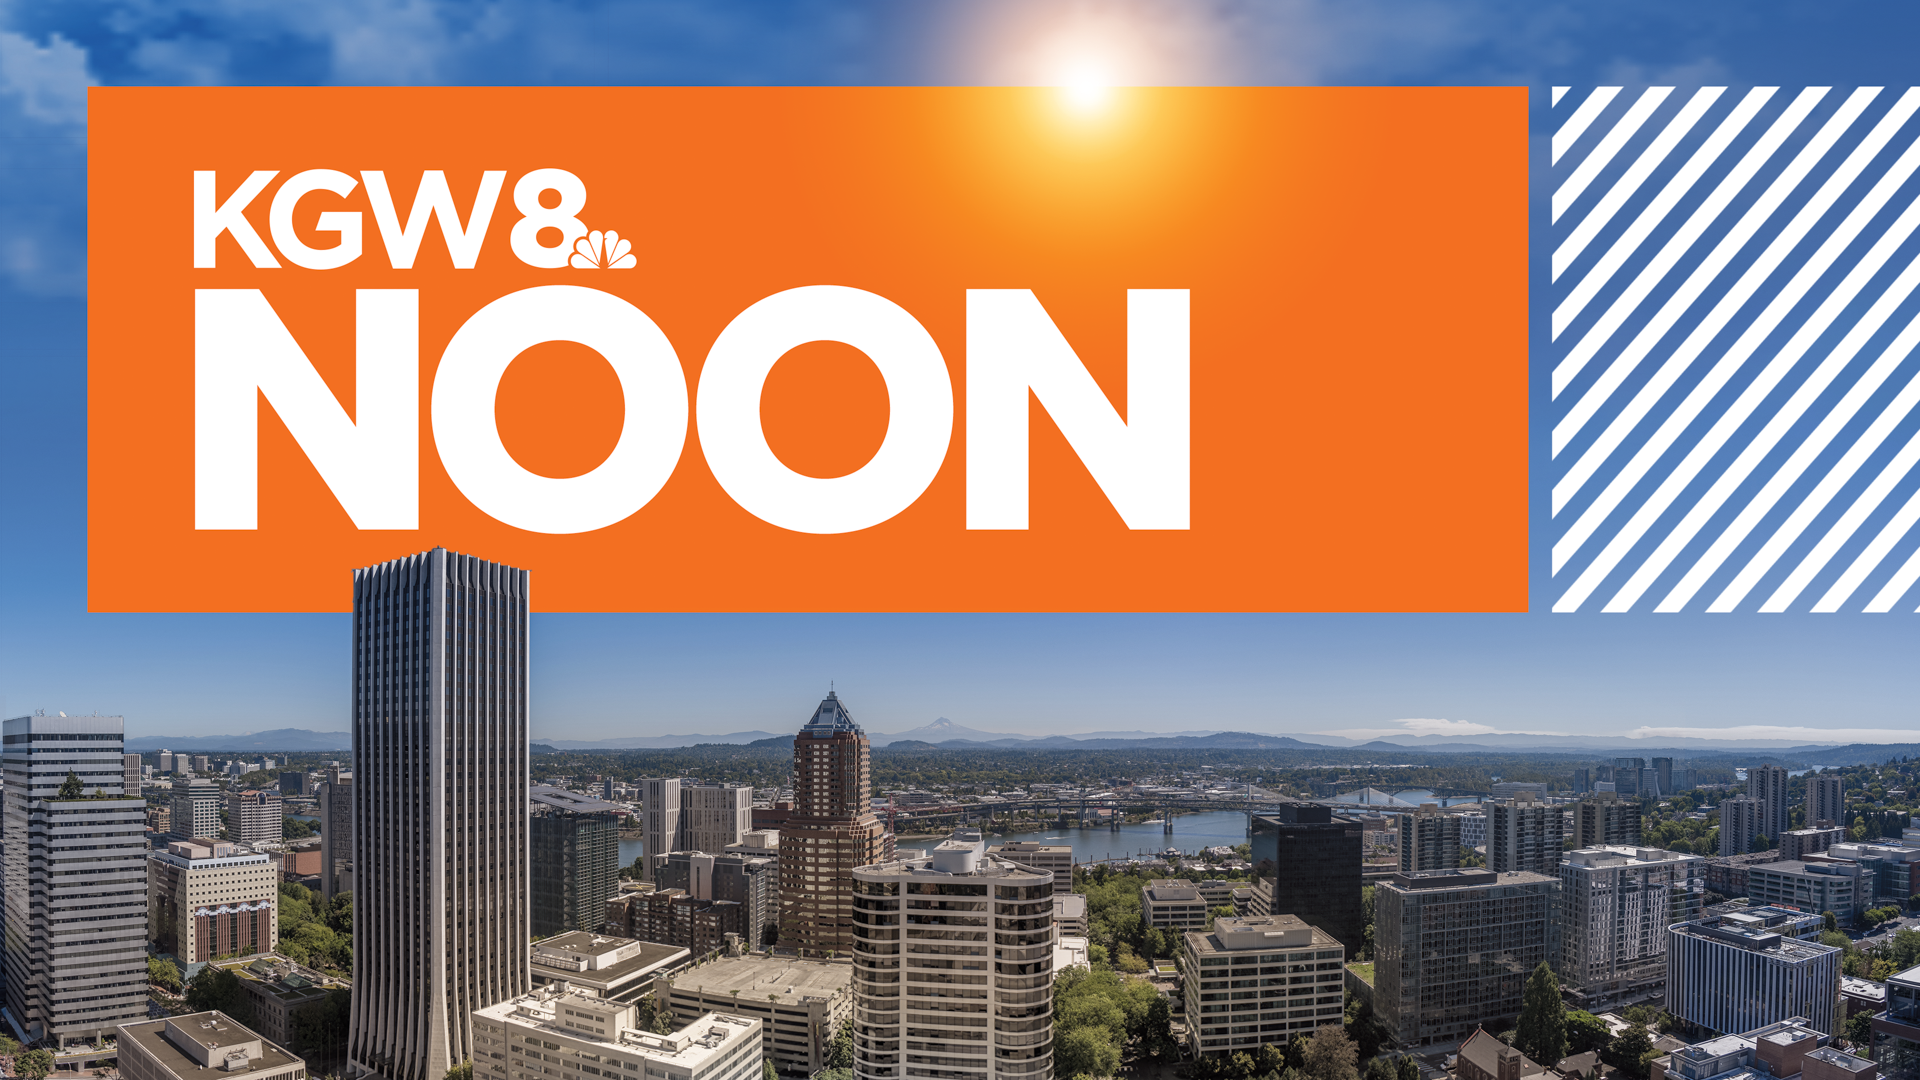 KGW Top Stories: Noon, Tuesday, September 20, 2022